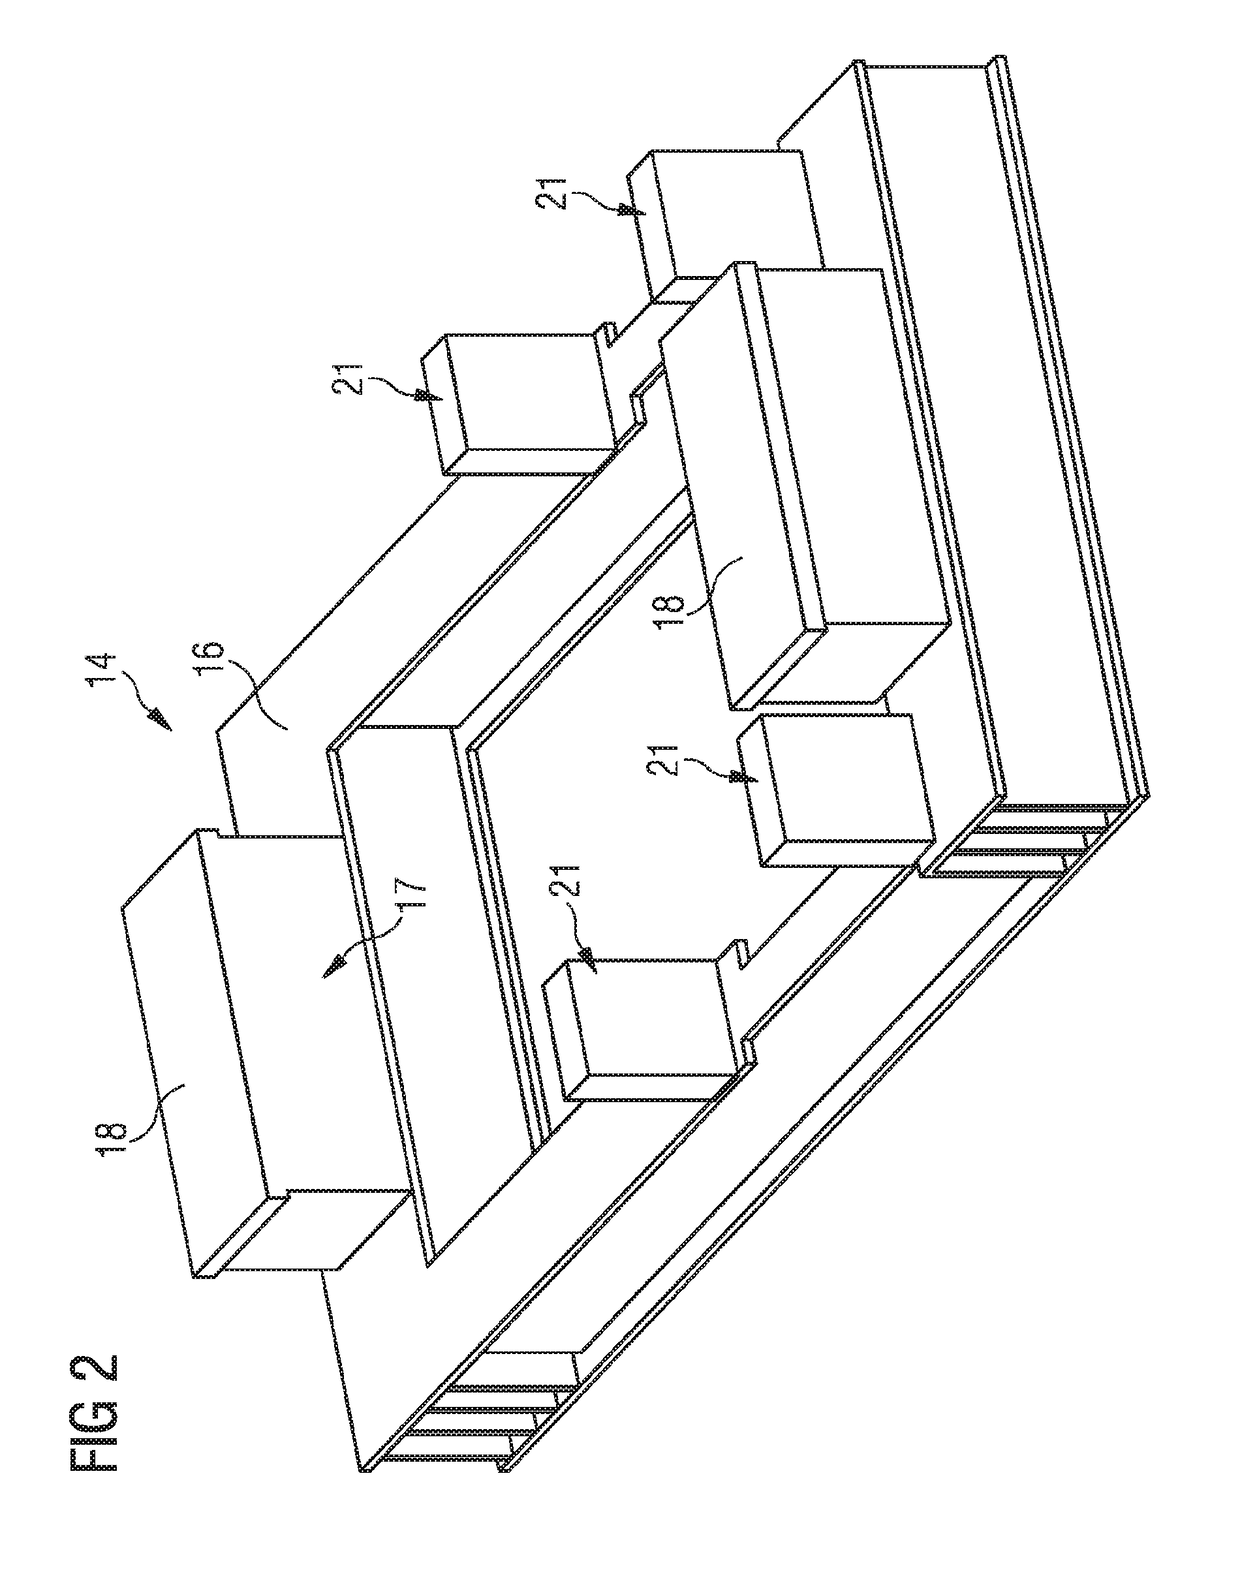 Exhaust-steam casing for a steam turbine and assembly system